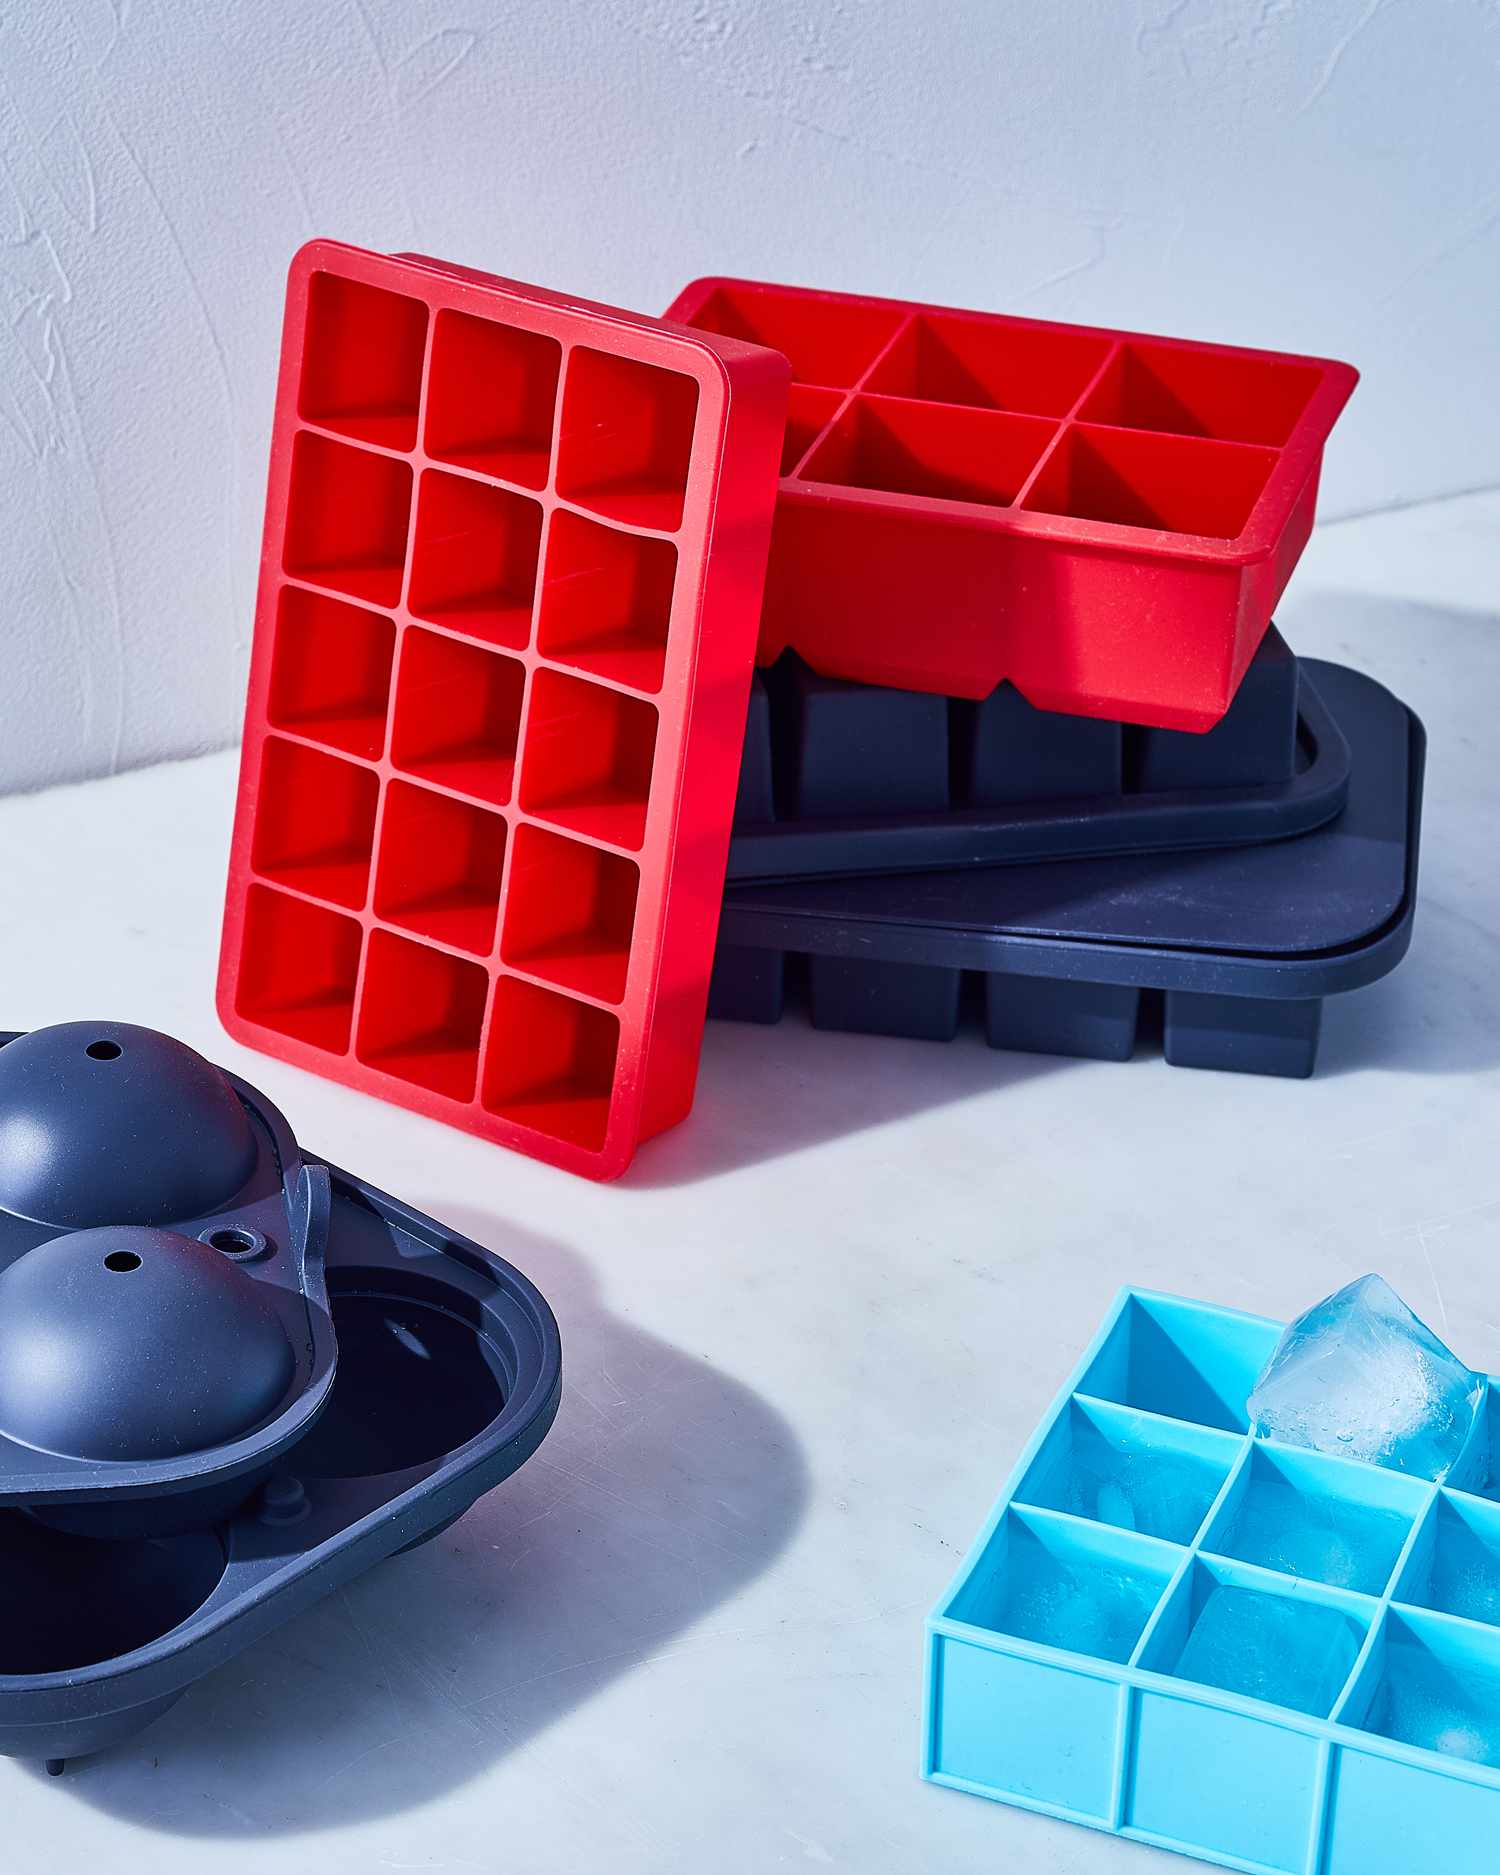 red and blue ice cube trays stacked